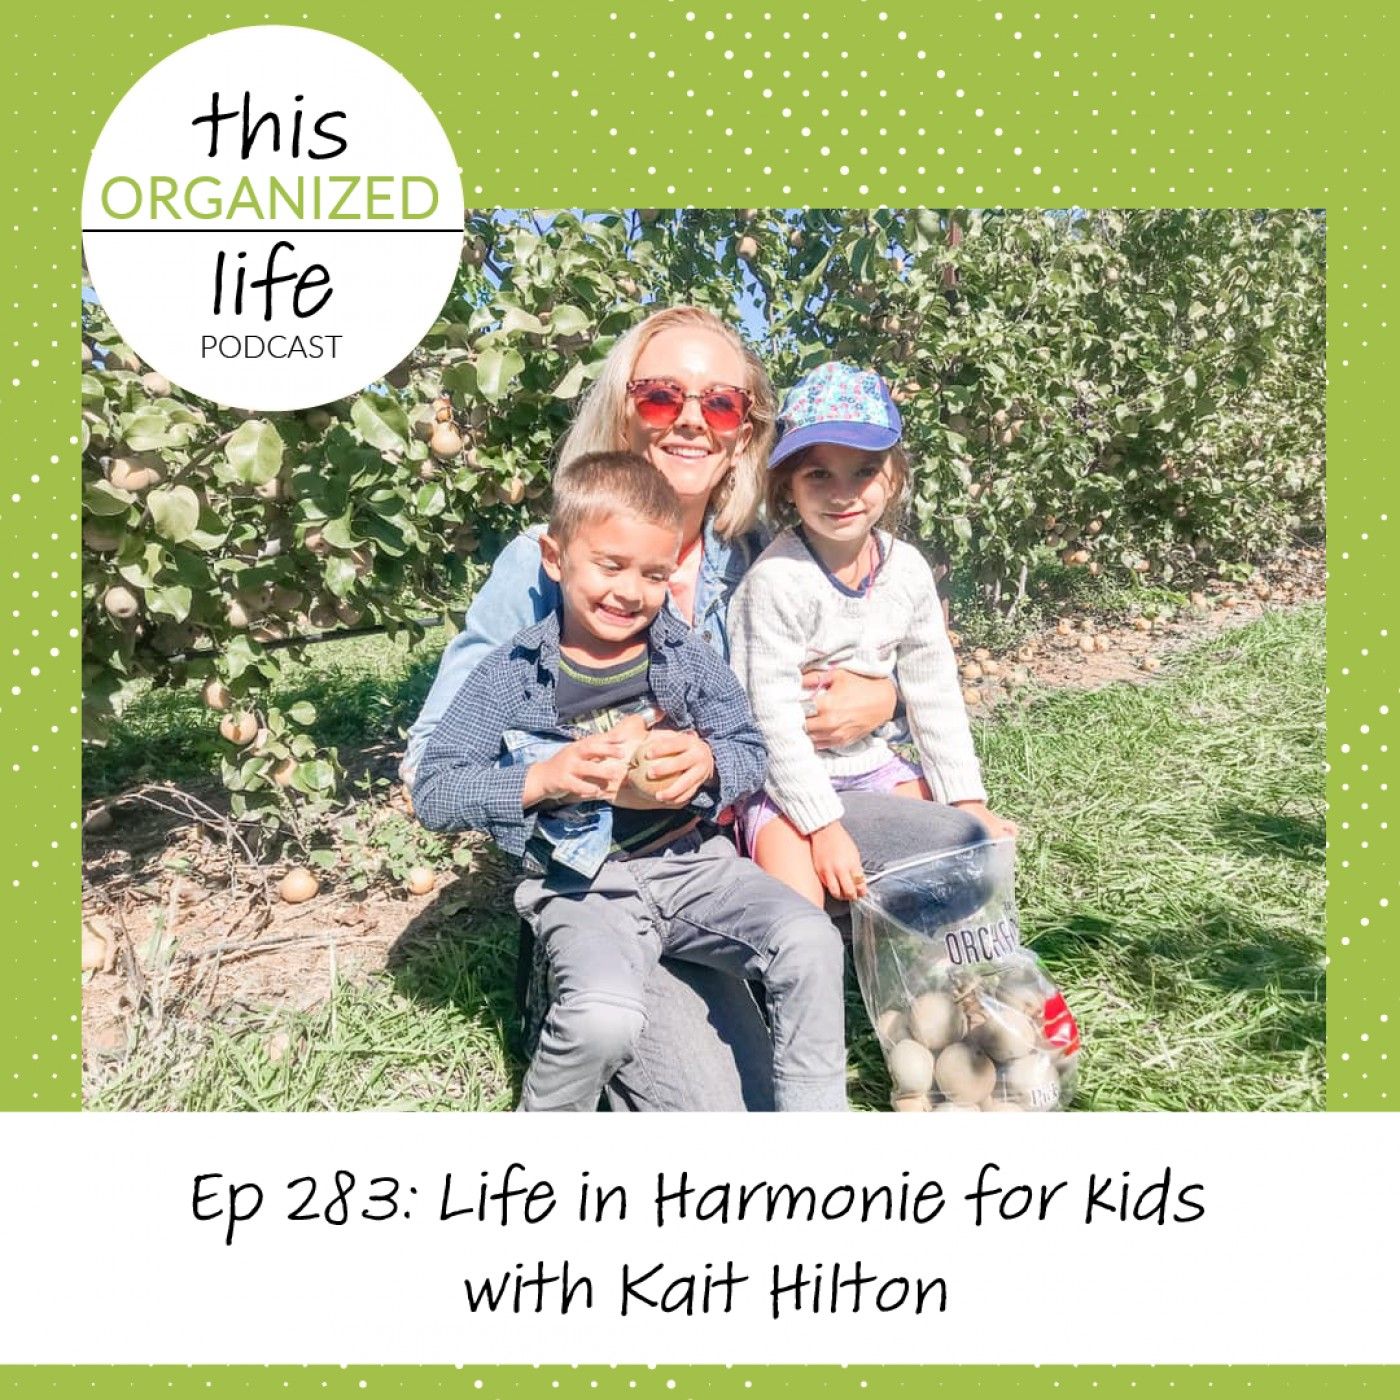 Ep 283: Life in Harmonie for Kids with Kait Hilton